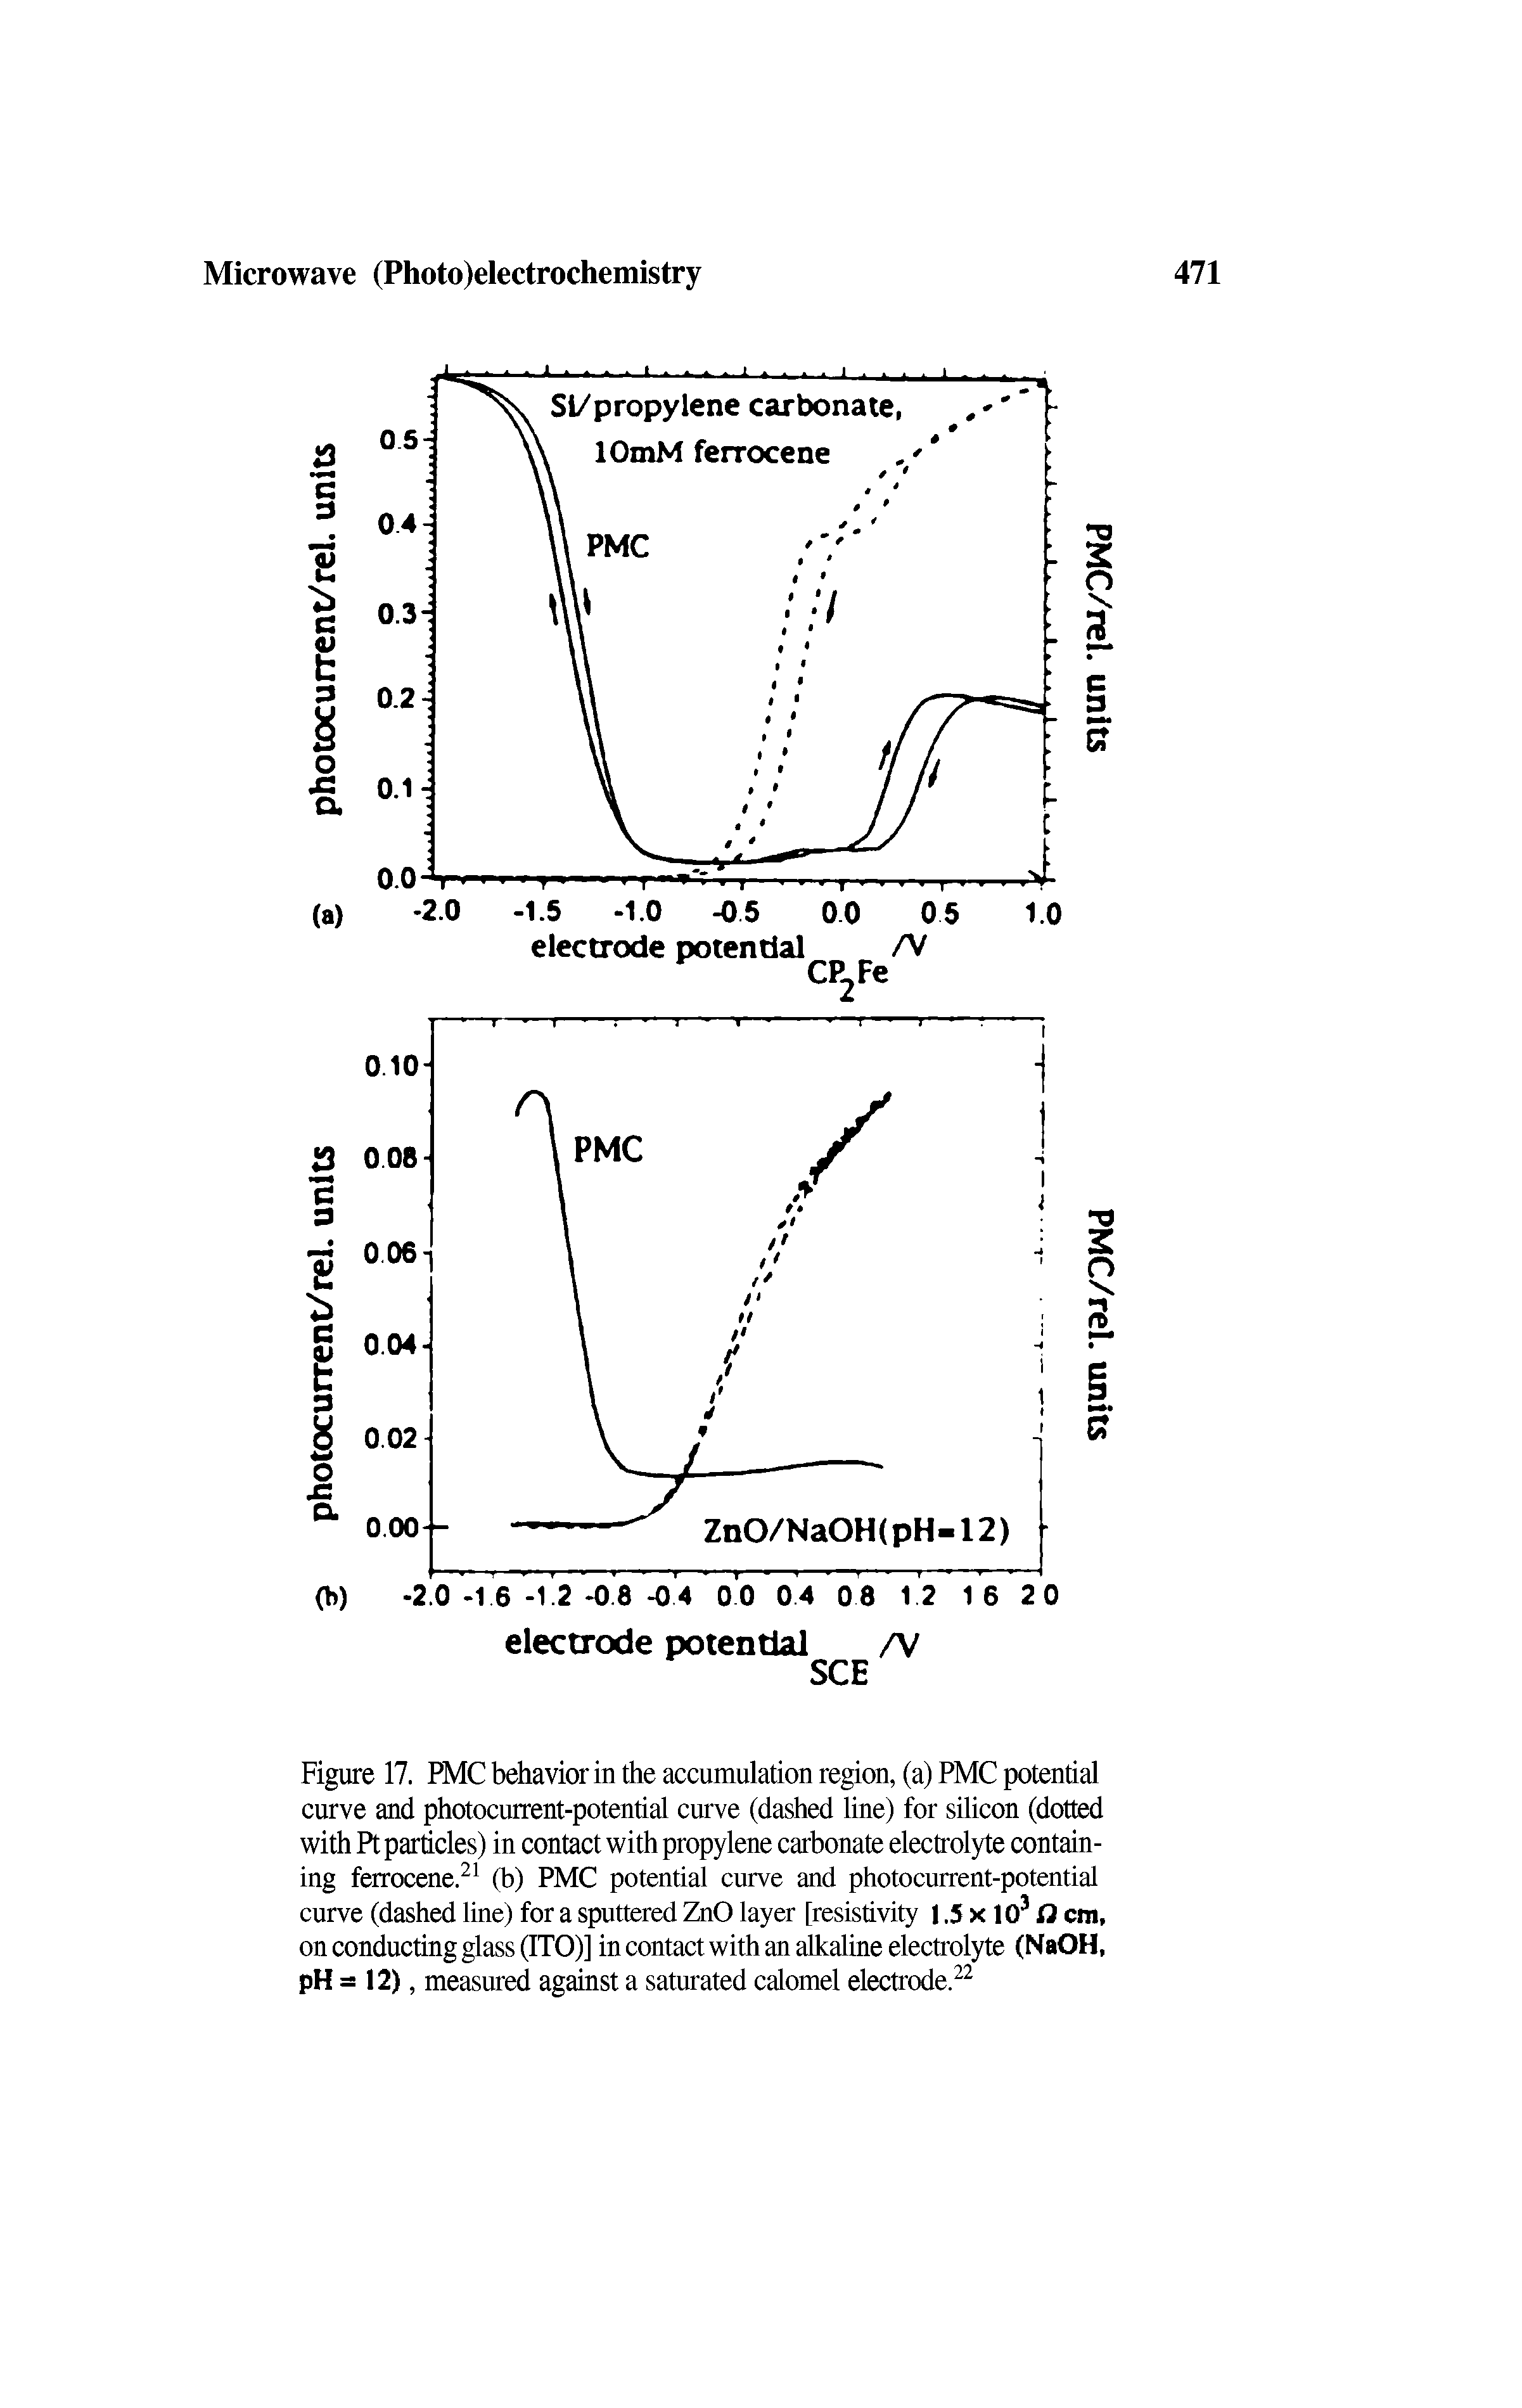 Figure 17. PMC behavior in the accumulation region, (a) PMC potential curve and photocurrent-potential curve (dashed line) for silicon (dotted with Pt particles) in contact with propylene carbonate electrolyte containing ferrocene.21 (b) PMC potential curve and photocurrent-potential curve (dashed line) for a sputtered ZnO layer [resistivity 1,5 x 103 ft cm, on conducting glass (ITO)] in contact with an alkaline electrolyte (NaOH, pH = 12), measured against a saturated calomel electrode.22...